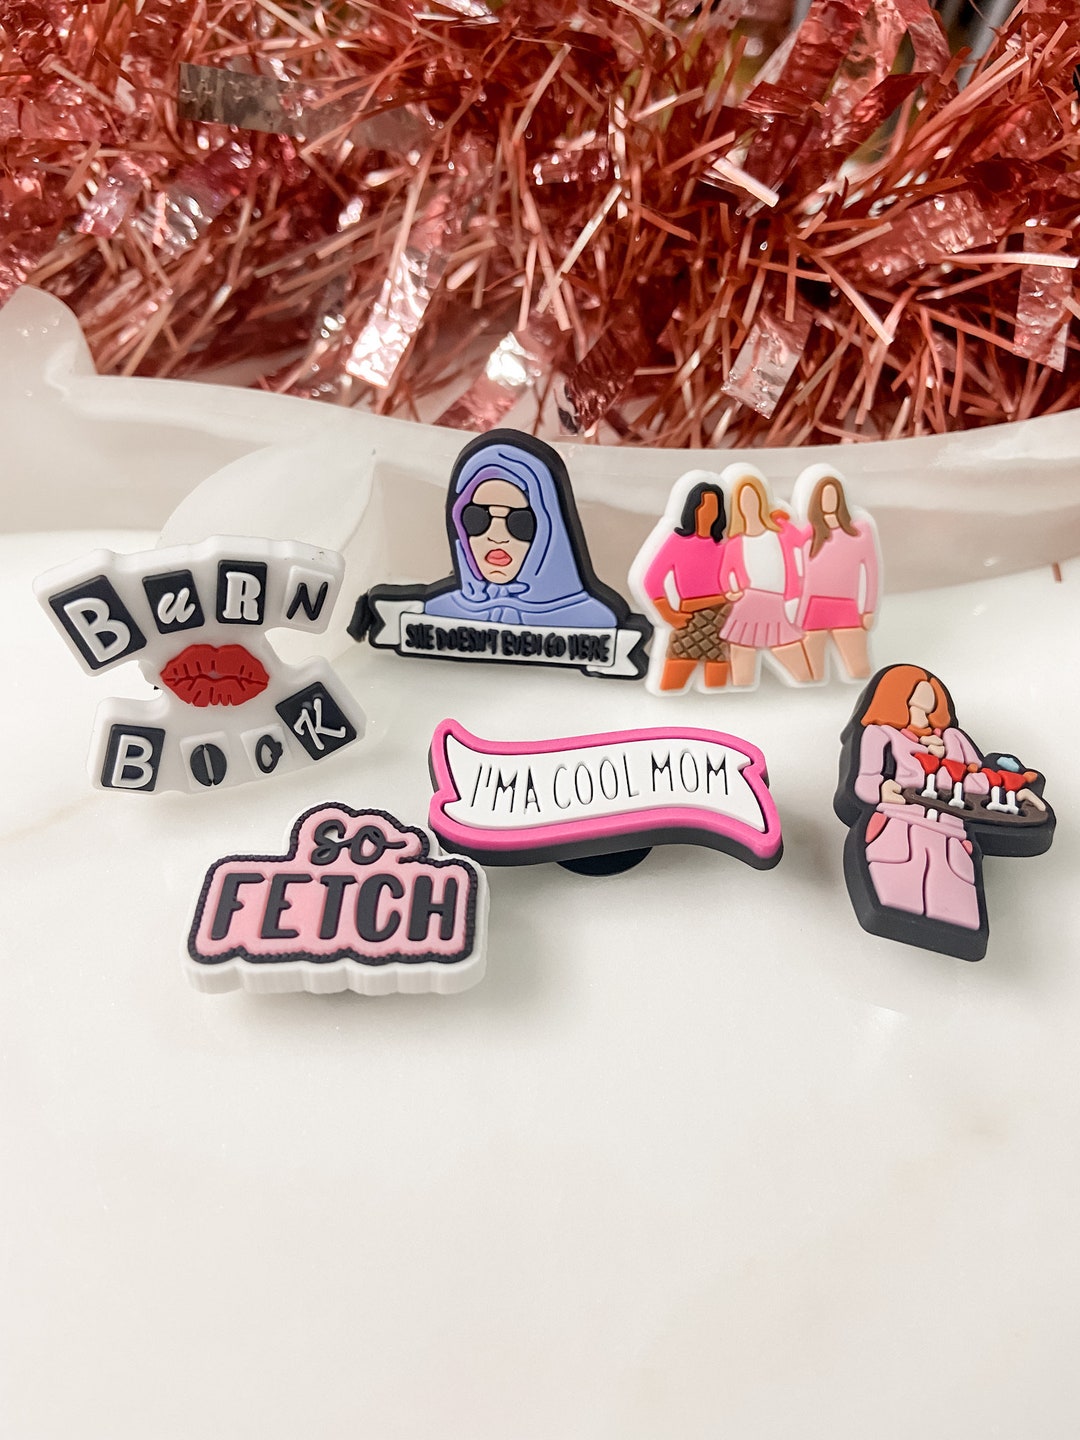 Mean Girls Croc Charms, Pink Croc Charms, Mean Girls Accessories, Movie-Inspired Croc Charms, Iconic Mean Girls Charms, Fetch Croc Charms